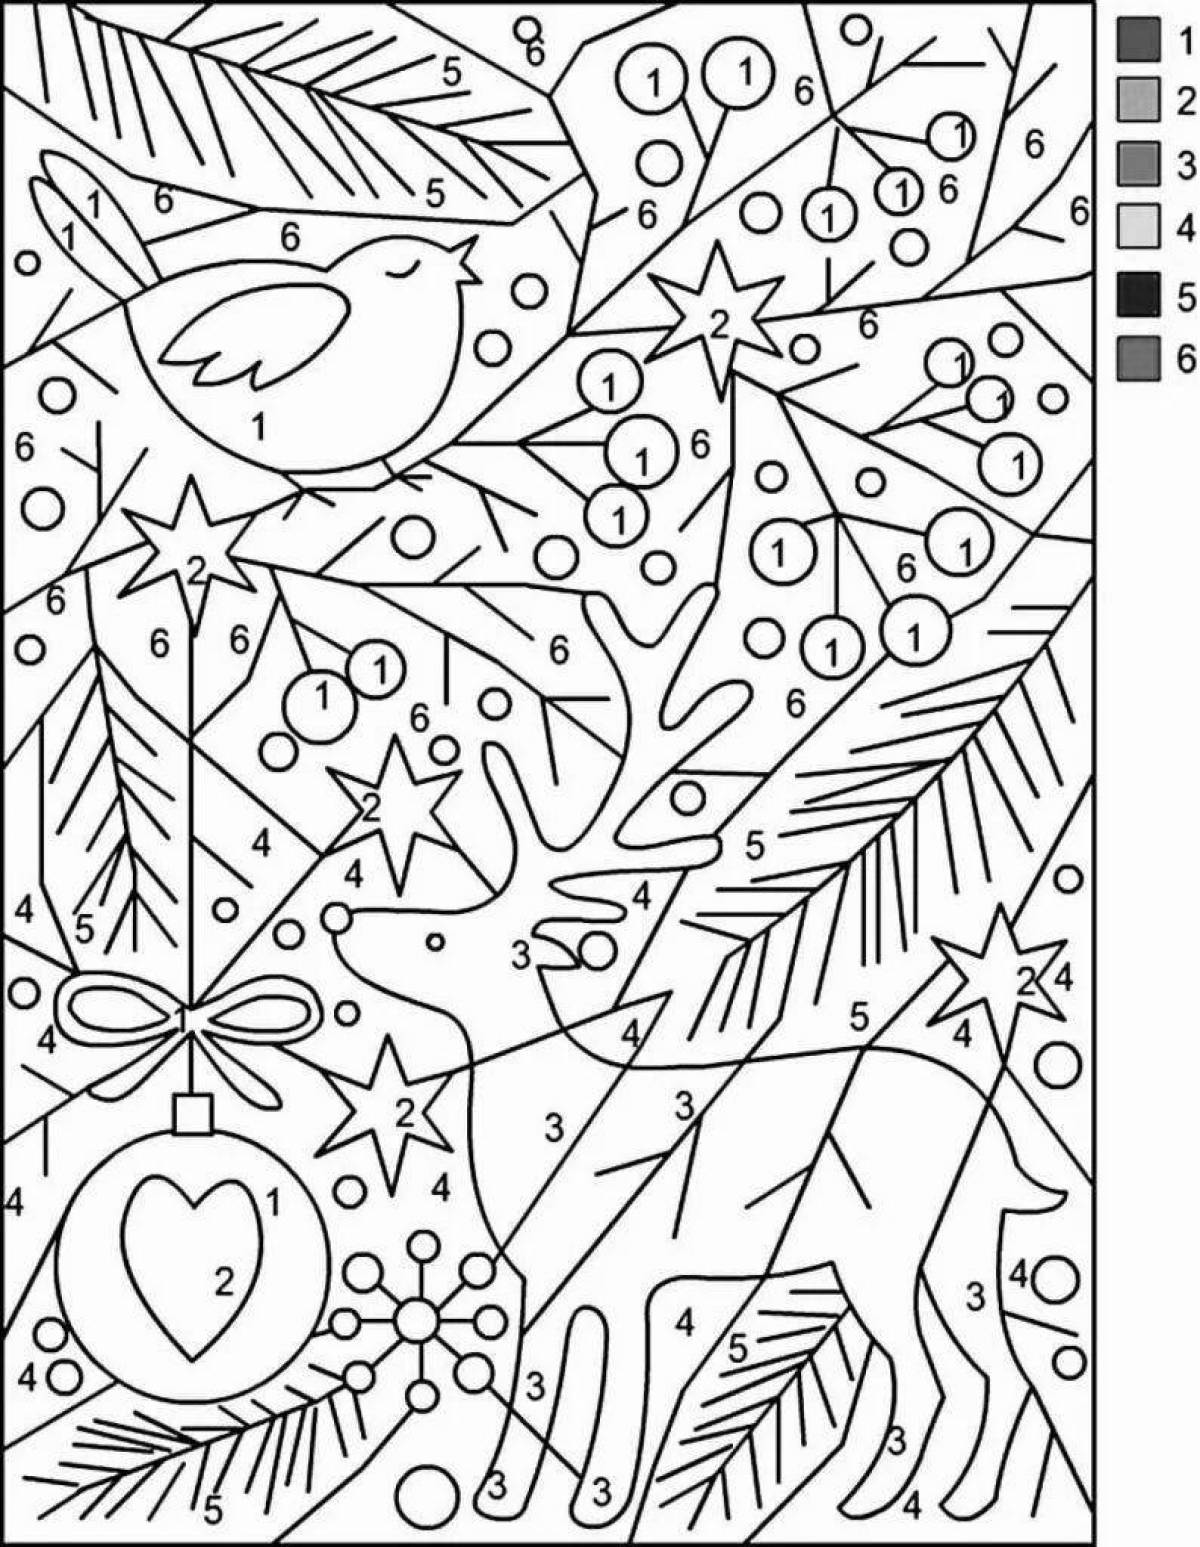 Bright new year coloring by numbers